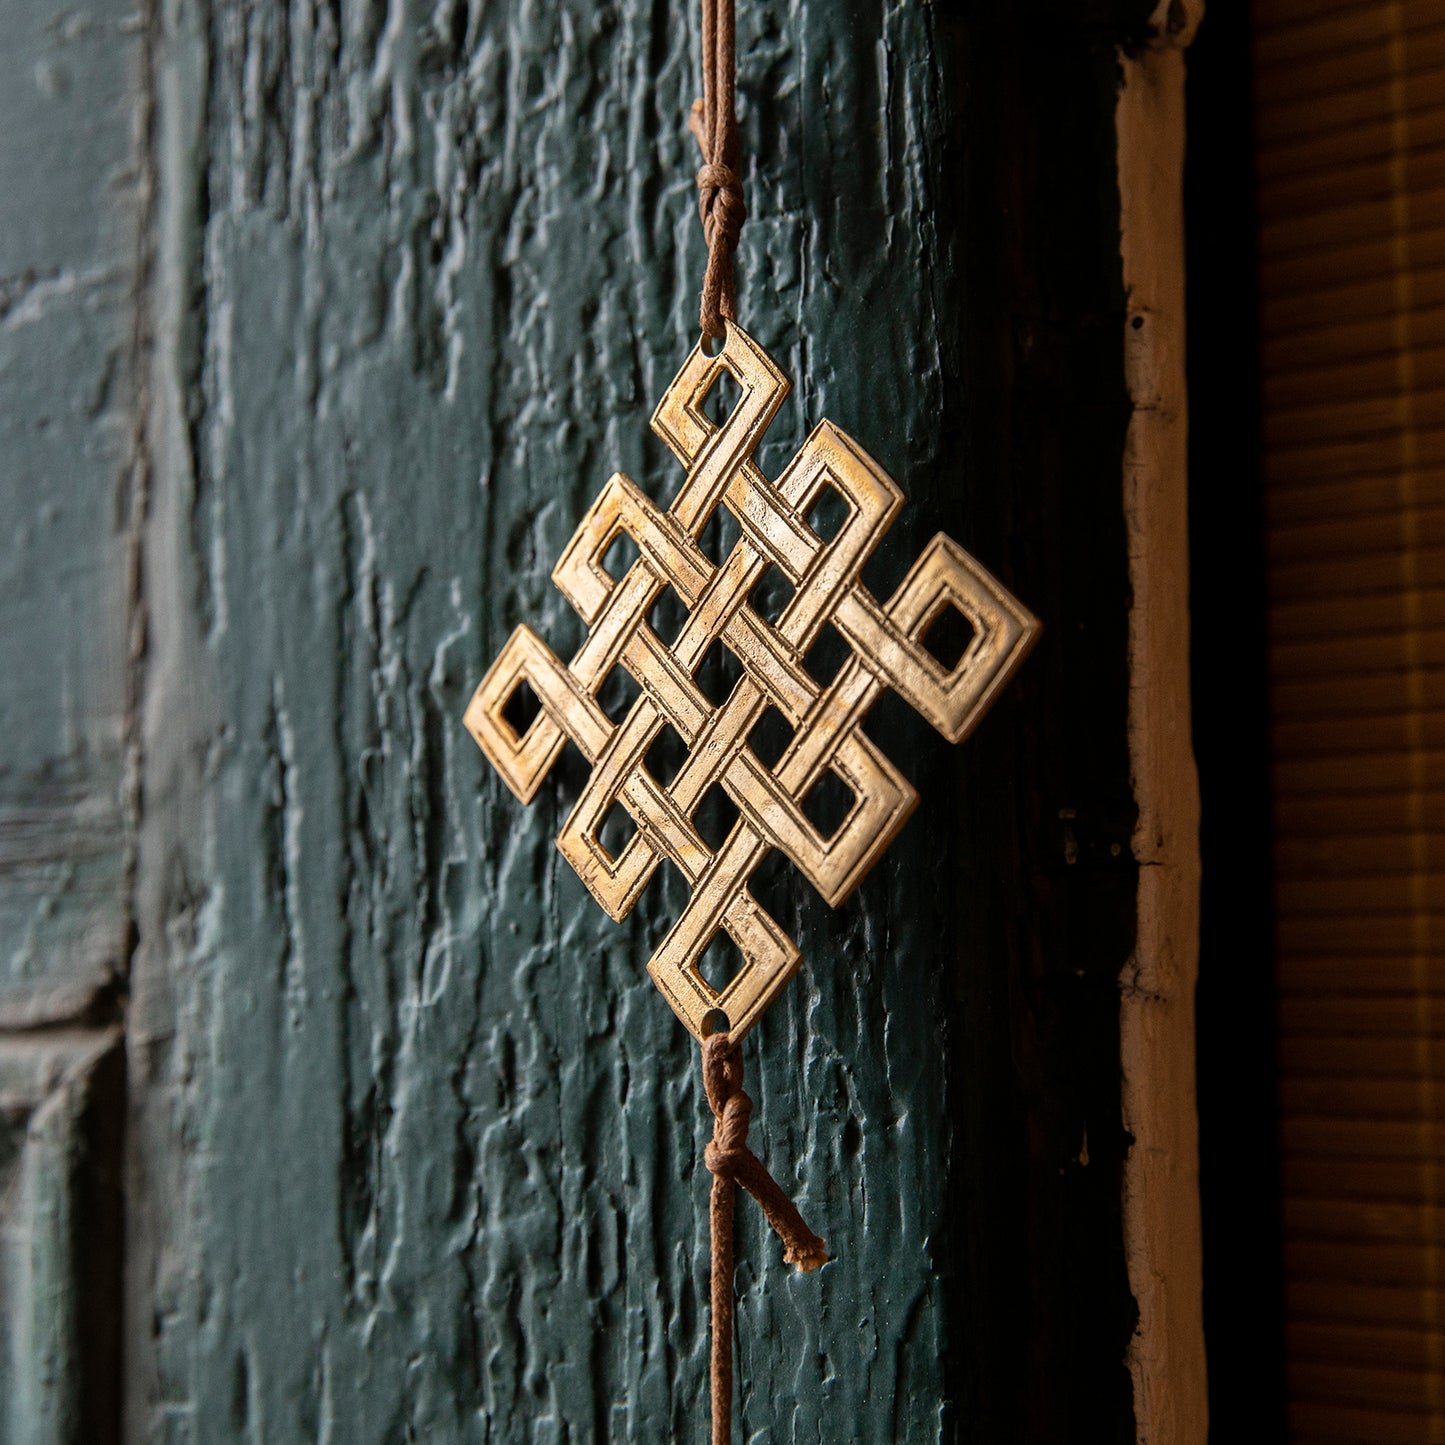 Endless Knot Door Chime